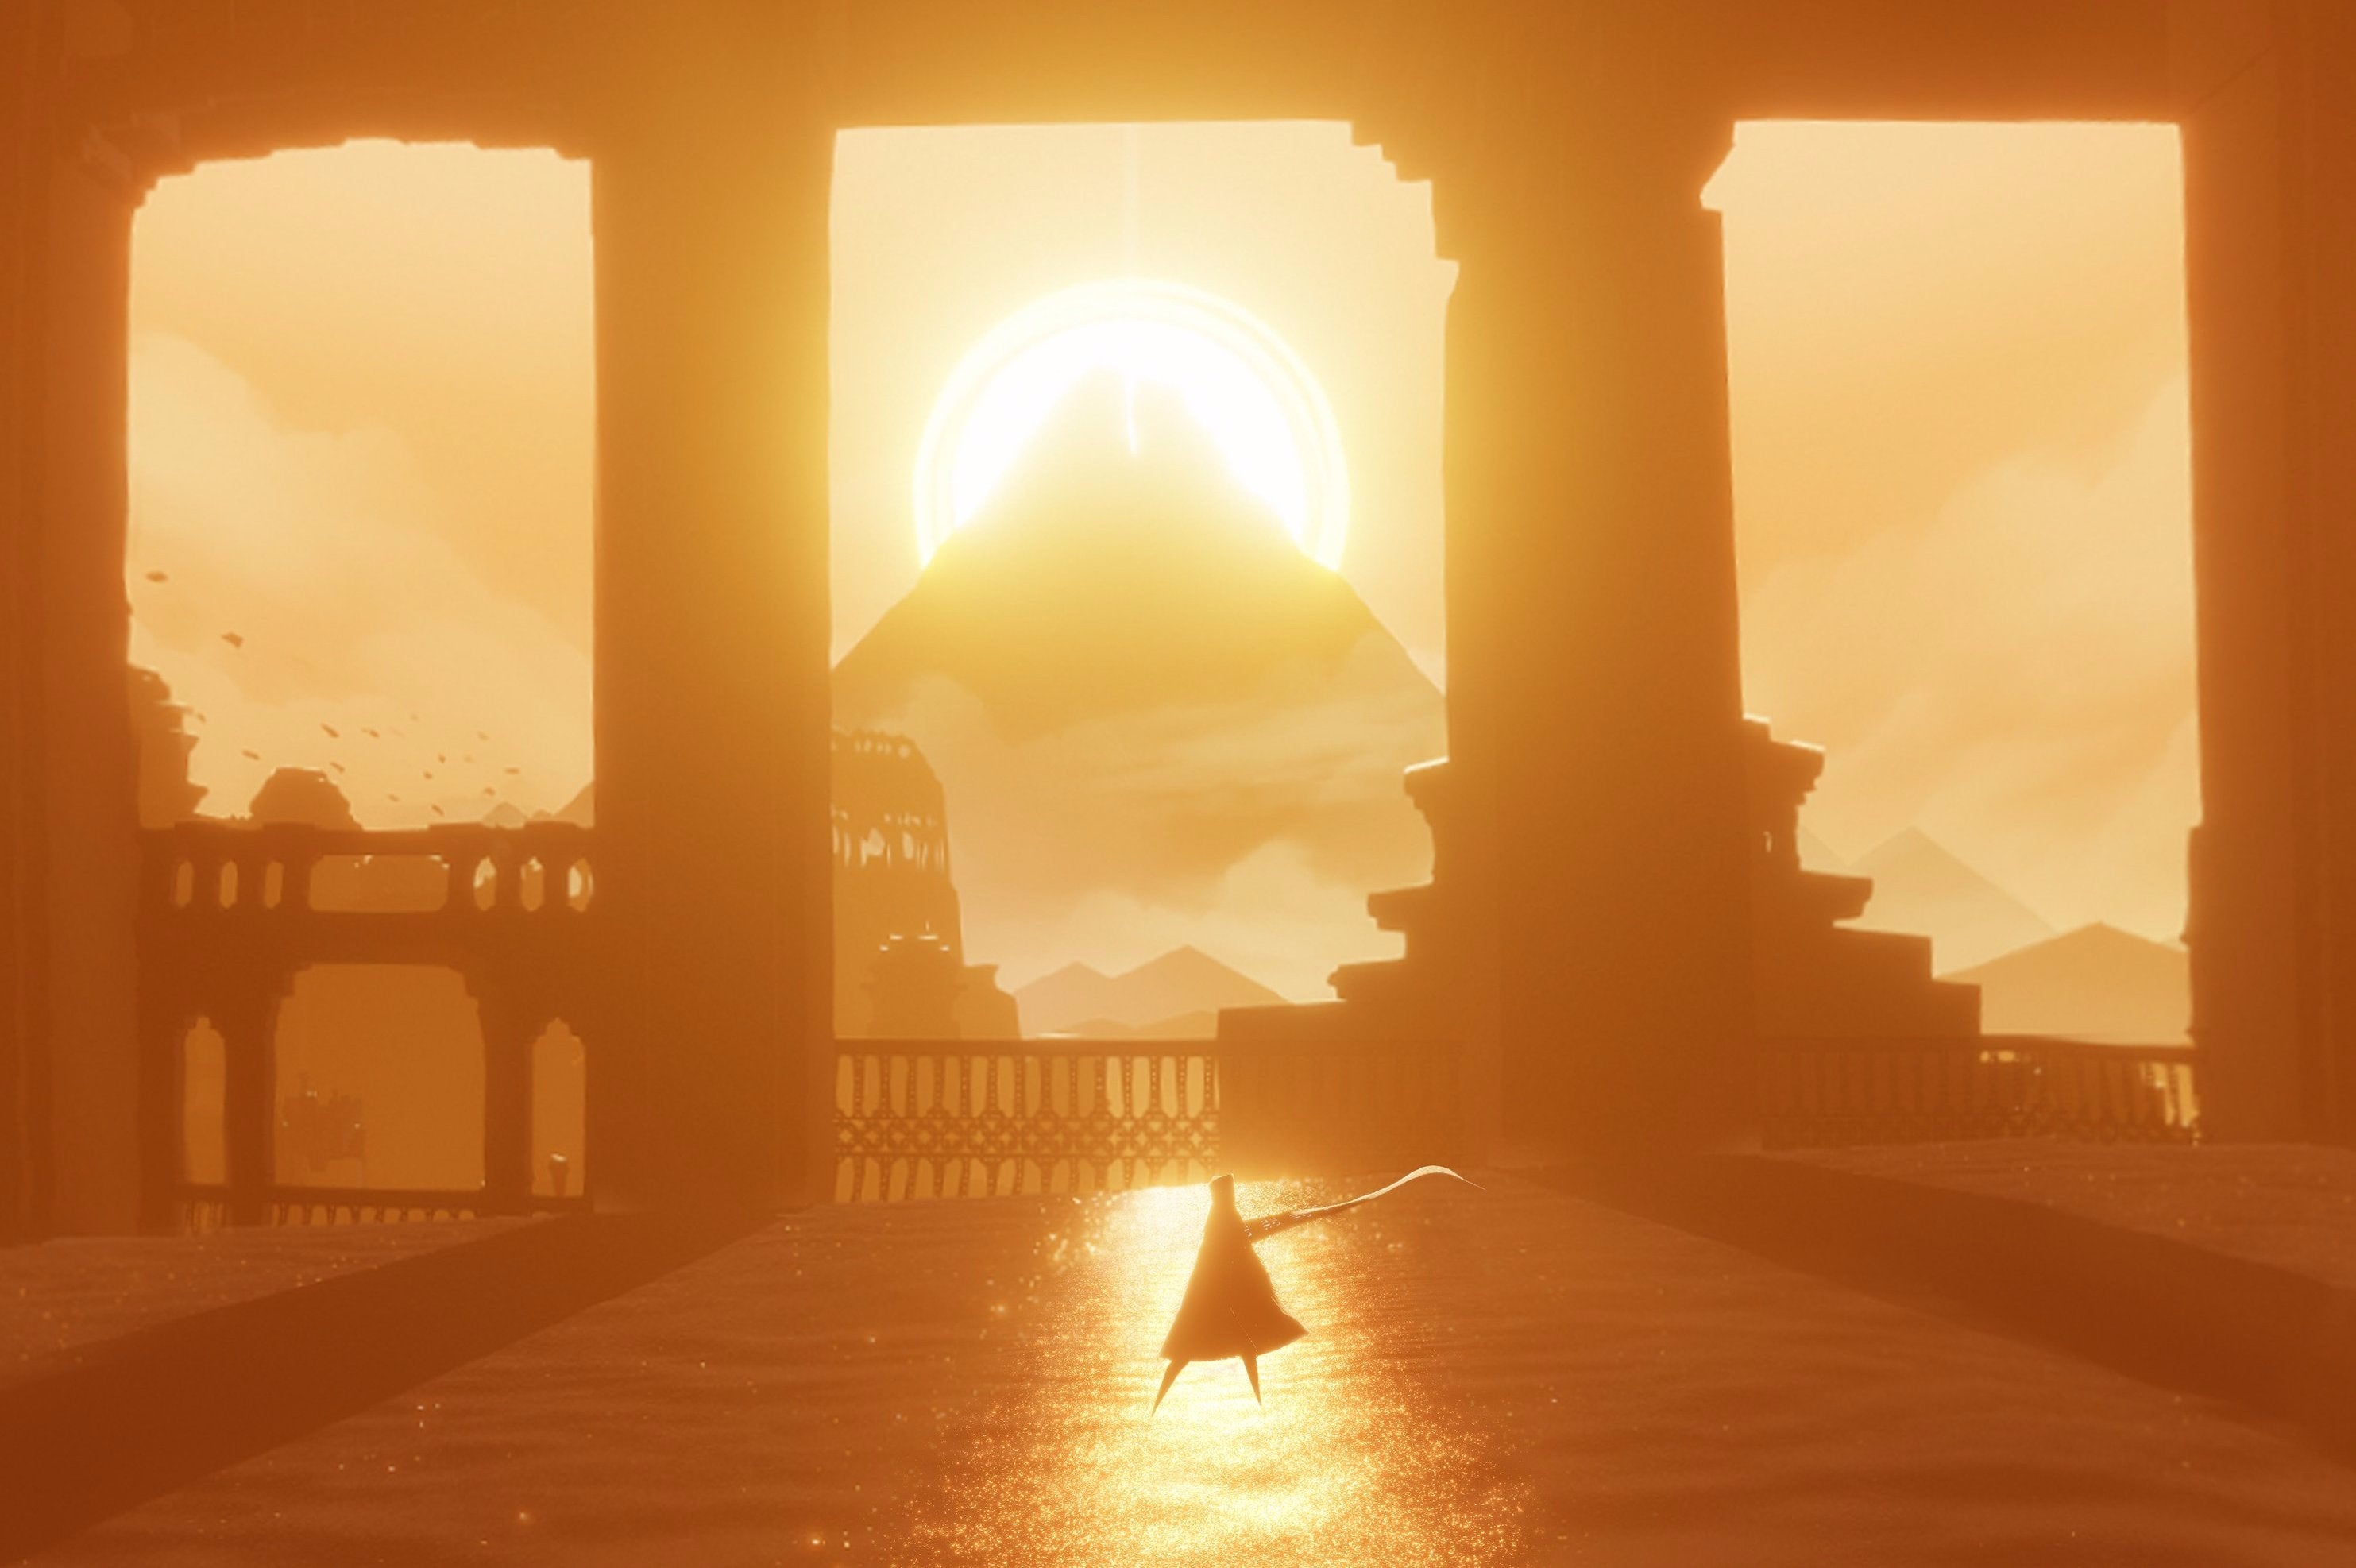 Image for PlayStation Plus' free September offerings include Journey, Lords of the Fallen